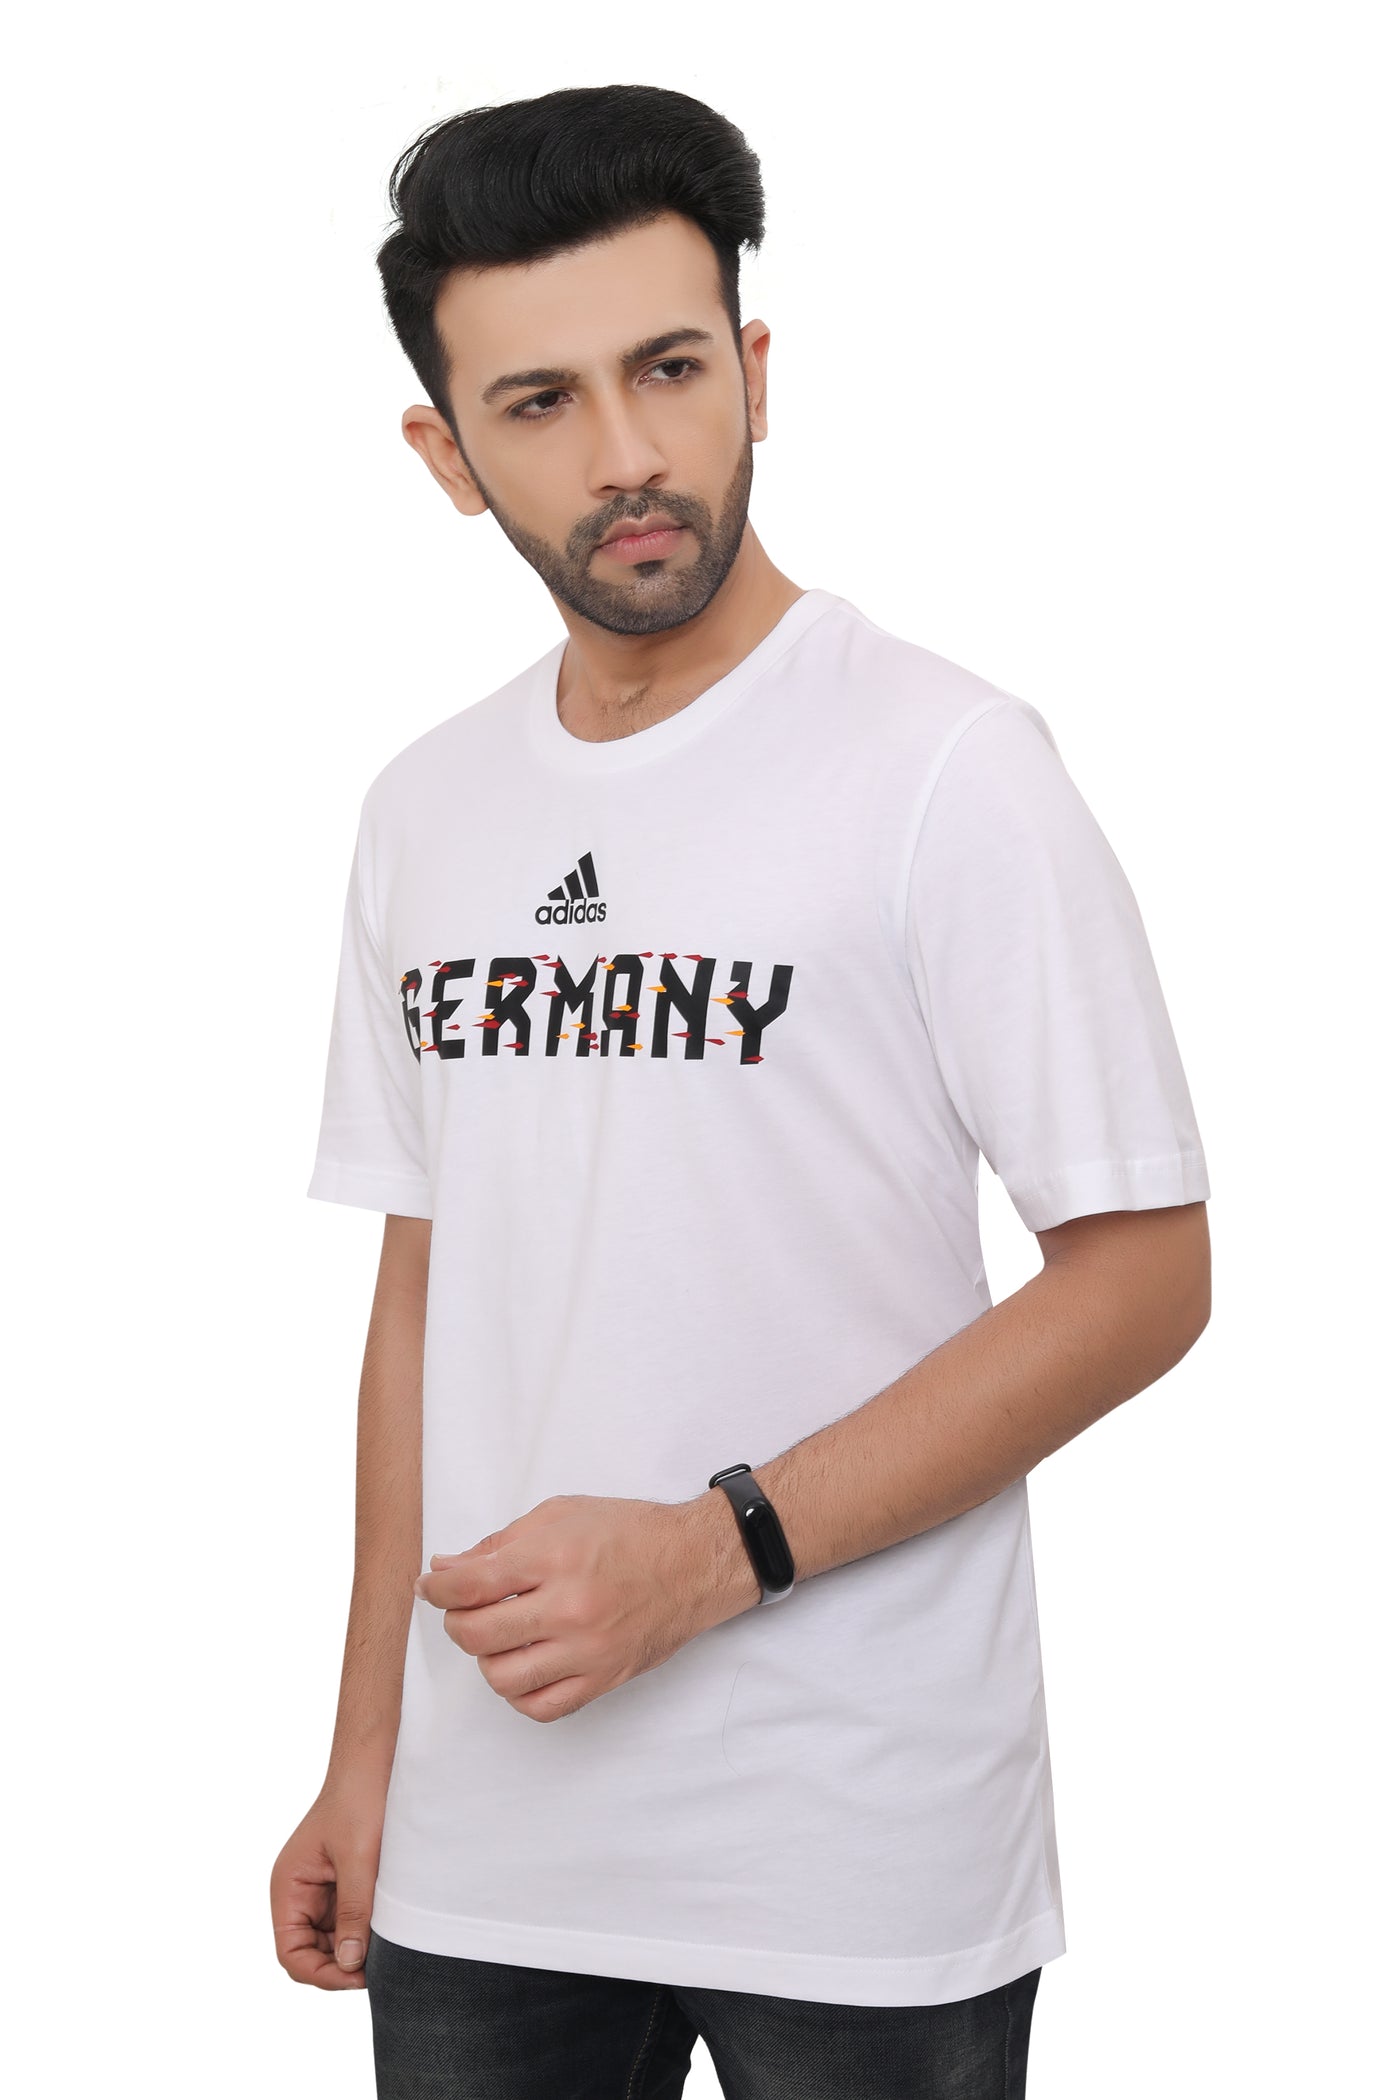 ADIDAS GERMANY FIFA WORLD CUP 2022 - JERSEY